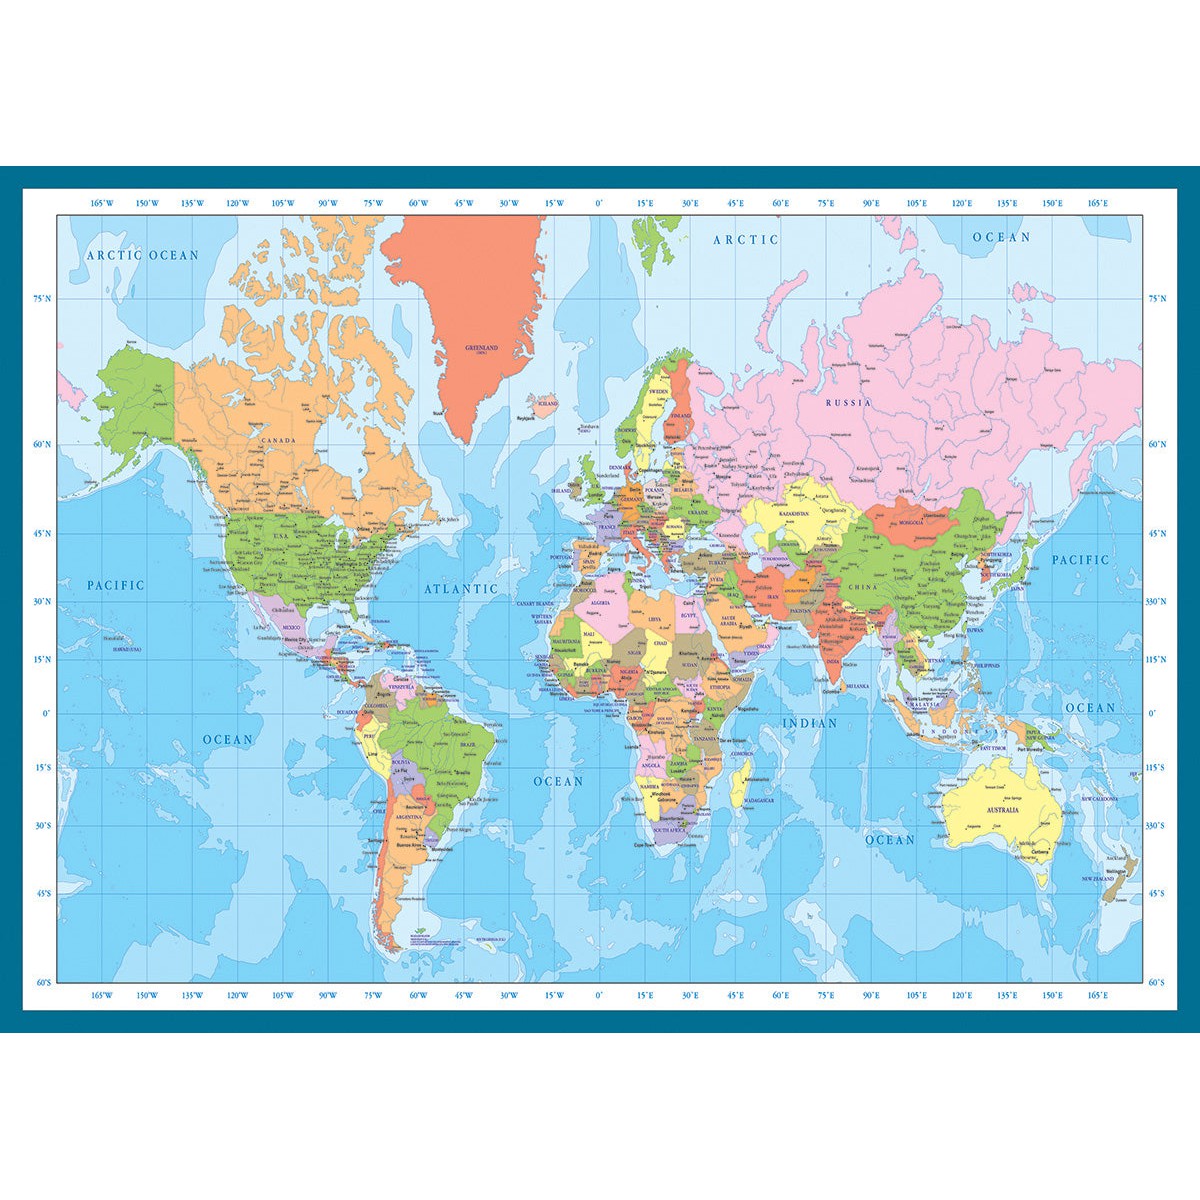 Modern Map of the World 1000 Piece Jigsaw Puzzle Eurographics